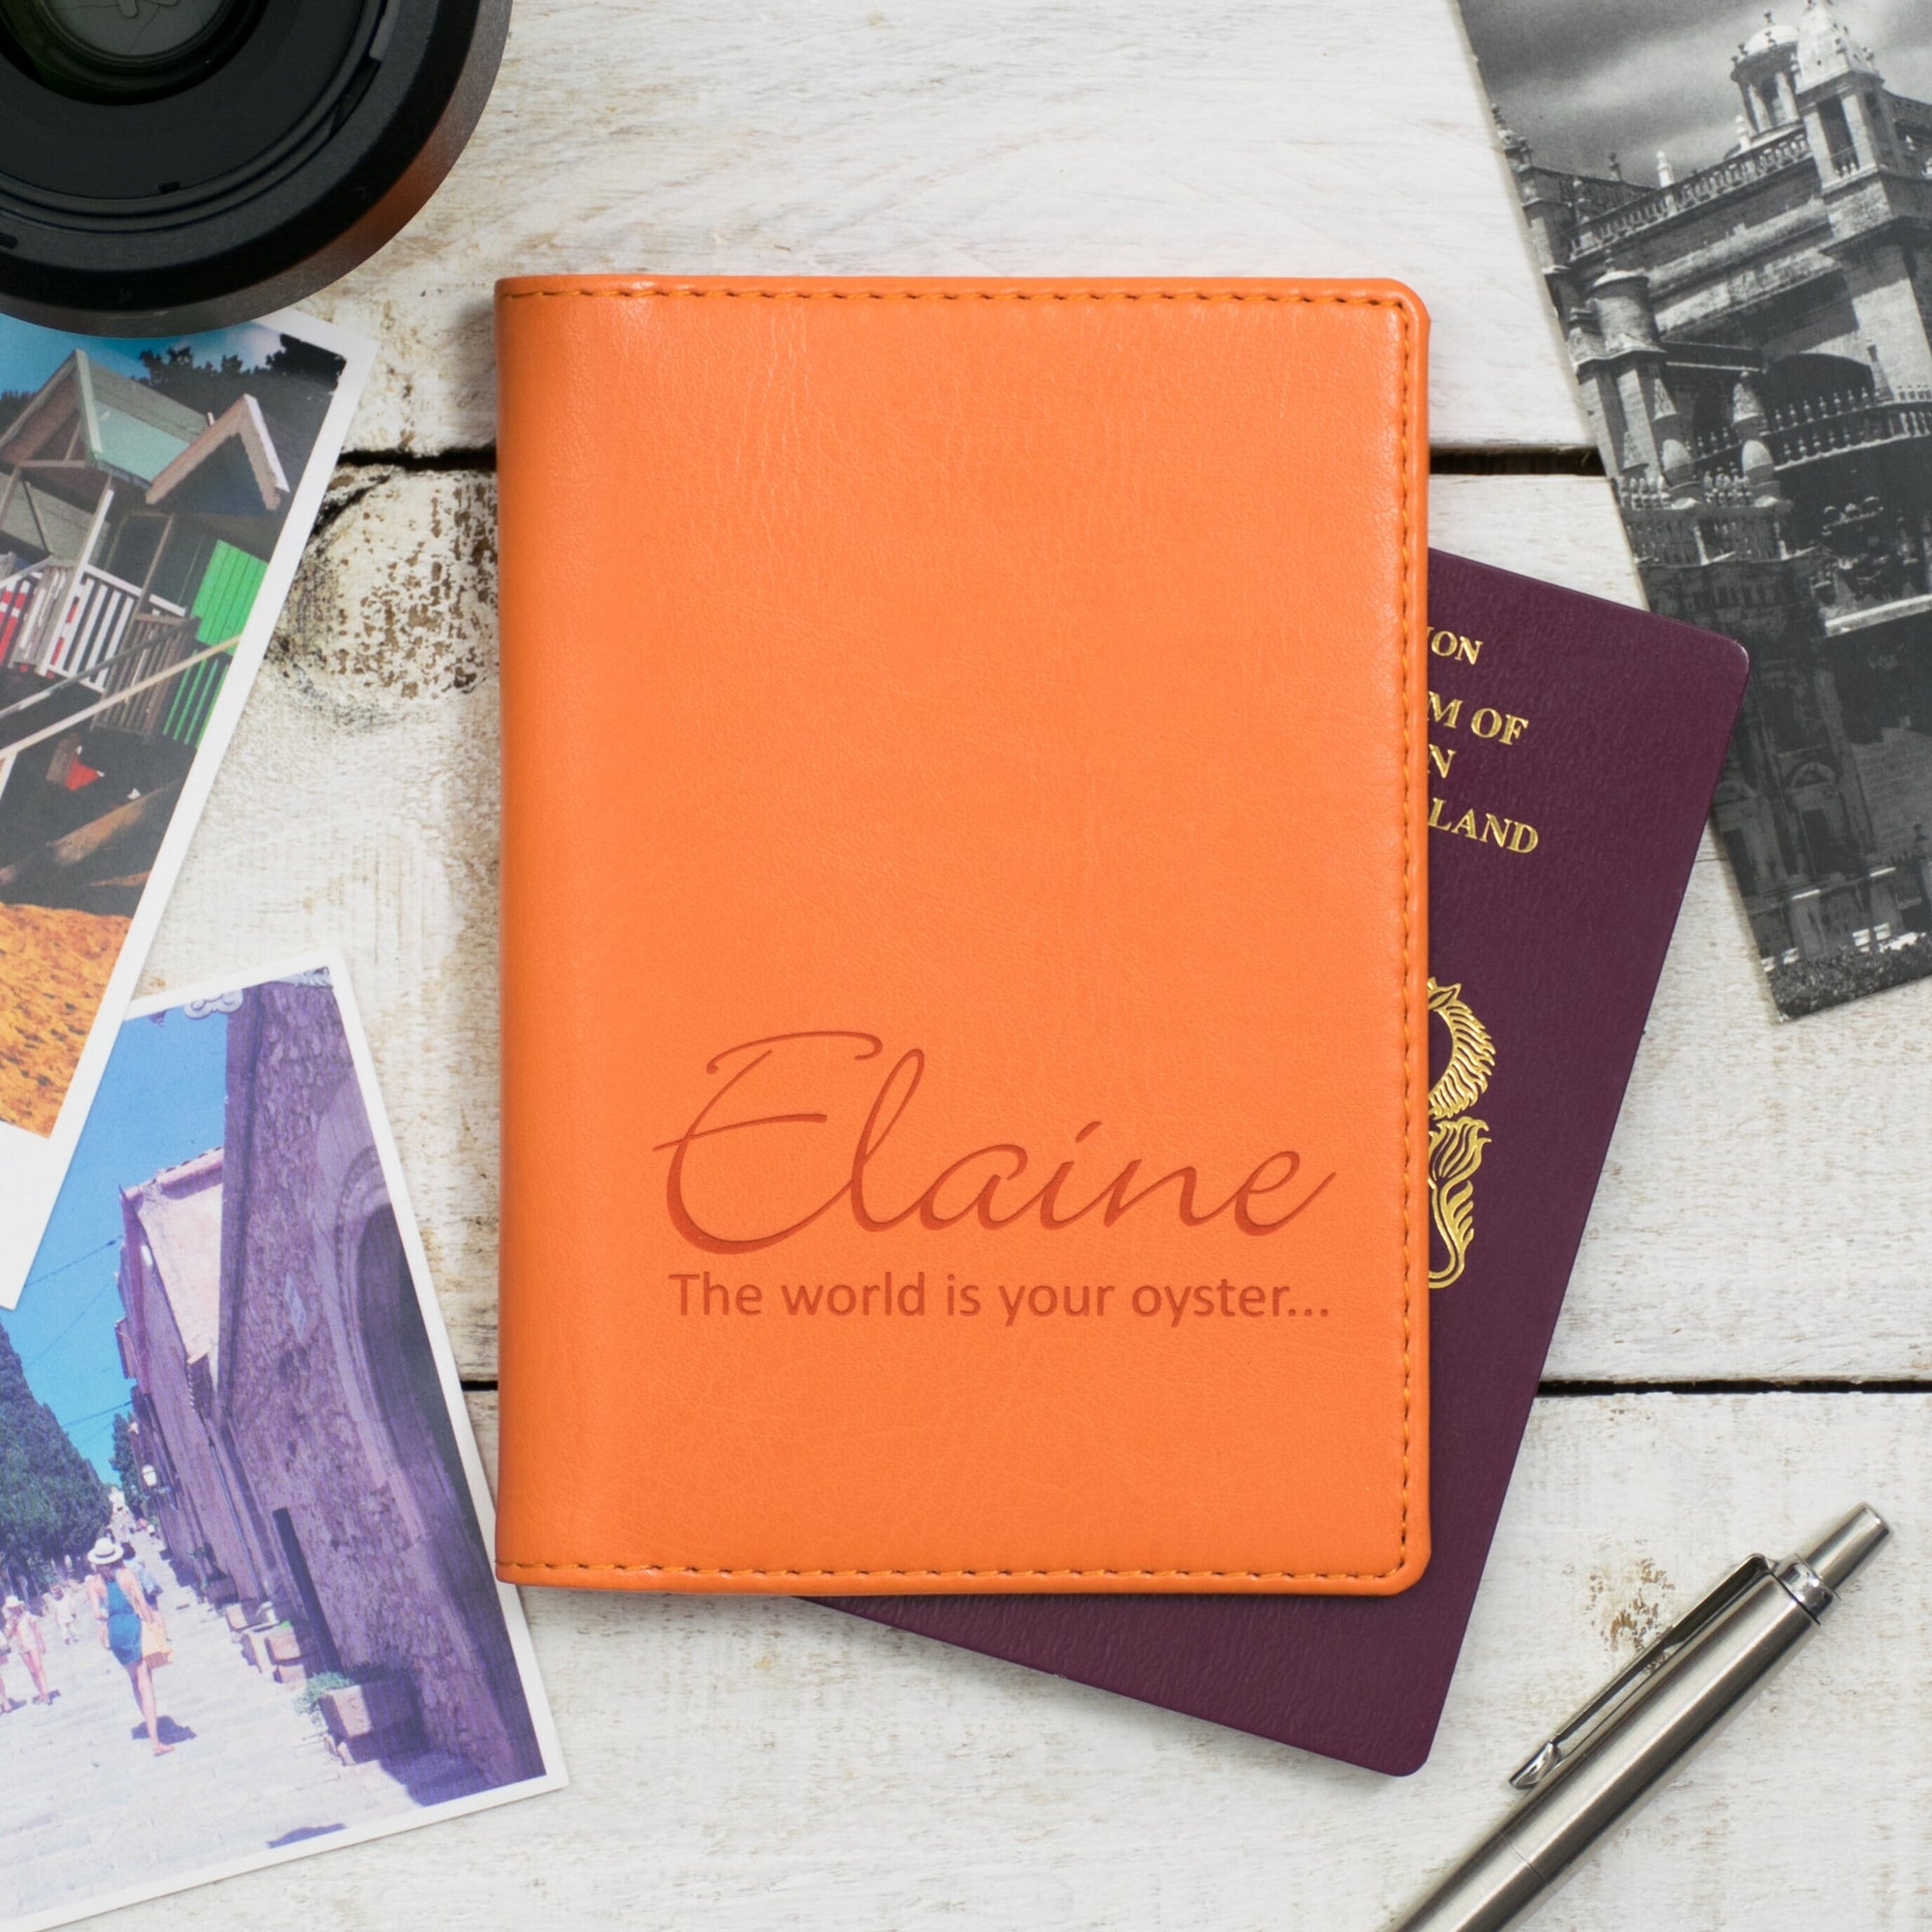 Stocking fillers for travel lovers